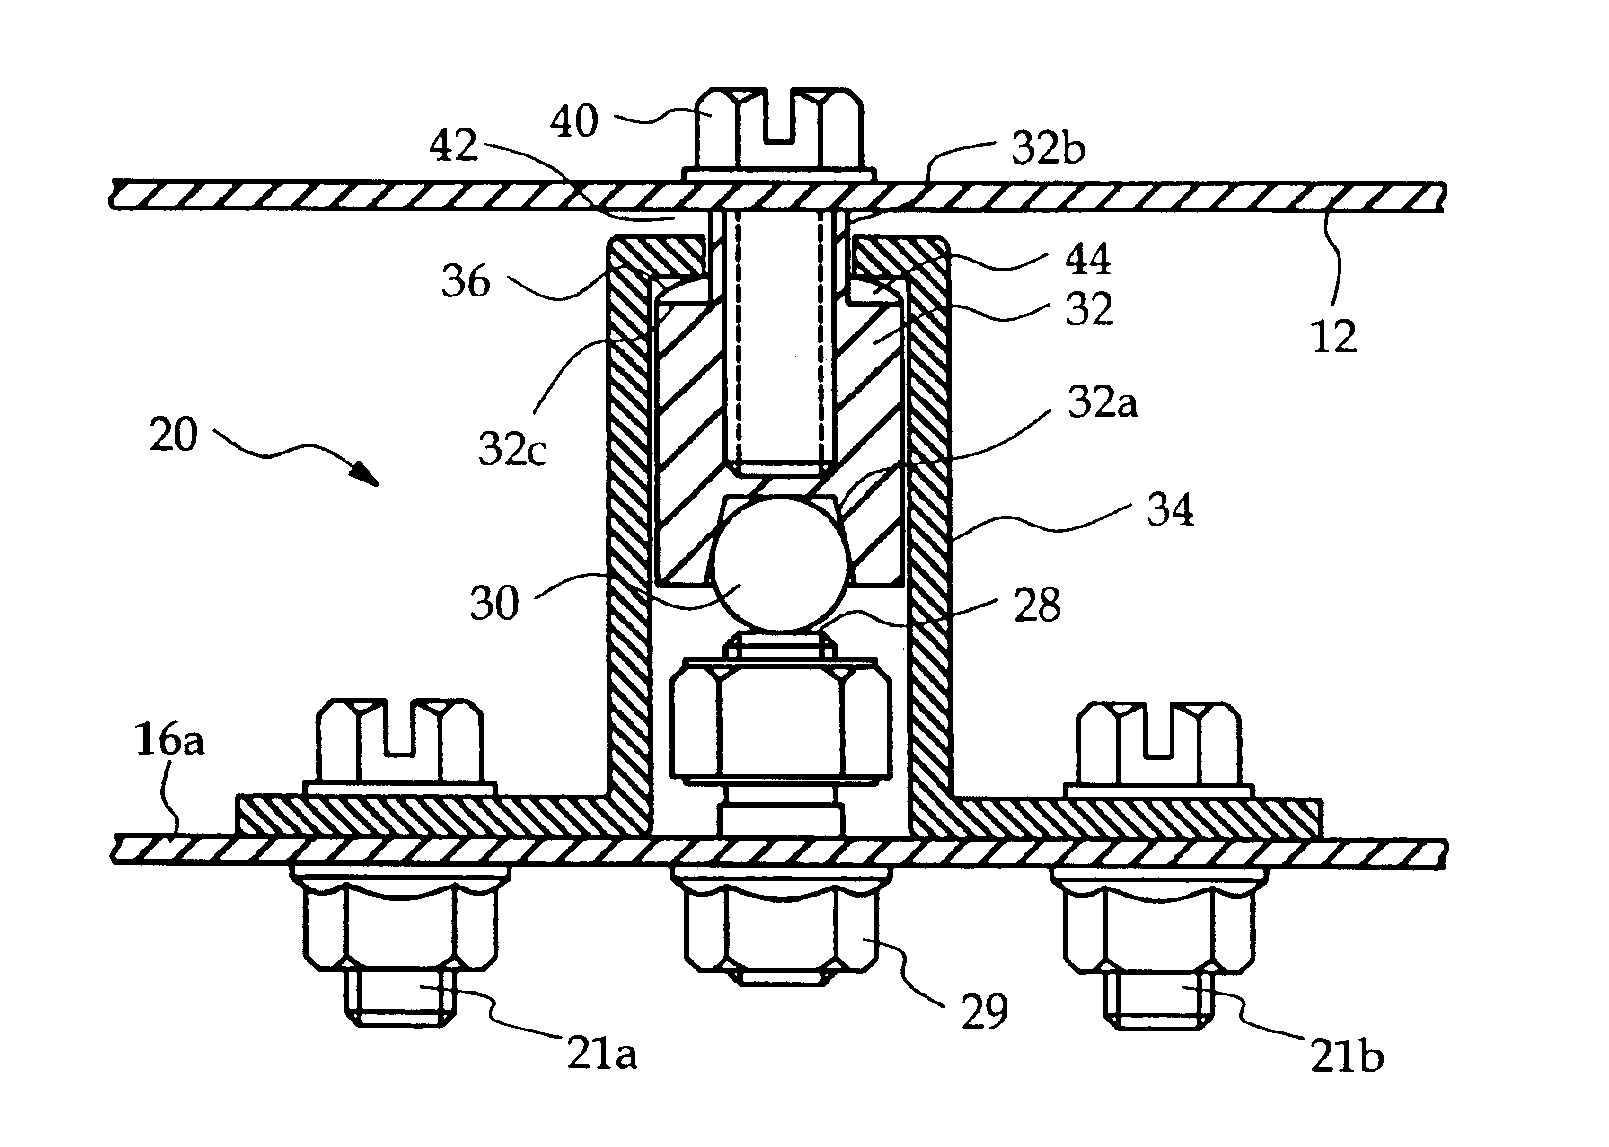 Frame-based occupant weight estimation load cell with ball-actuated force sensor